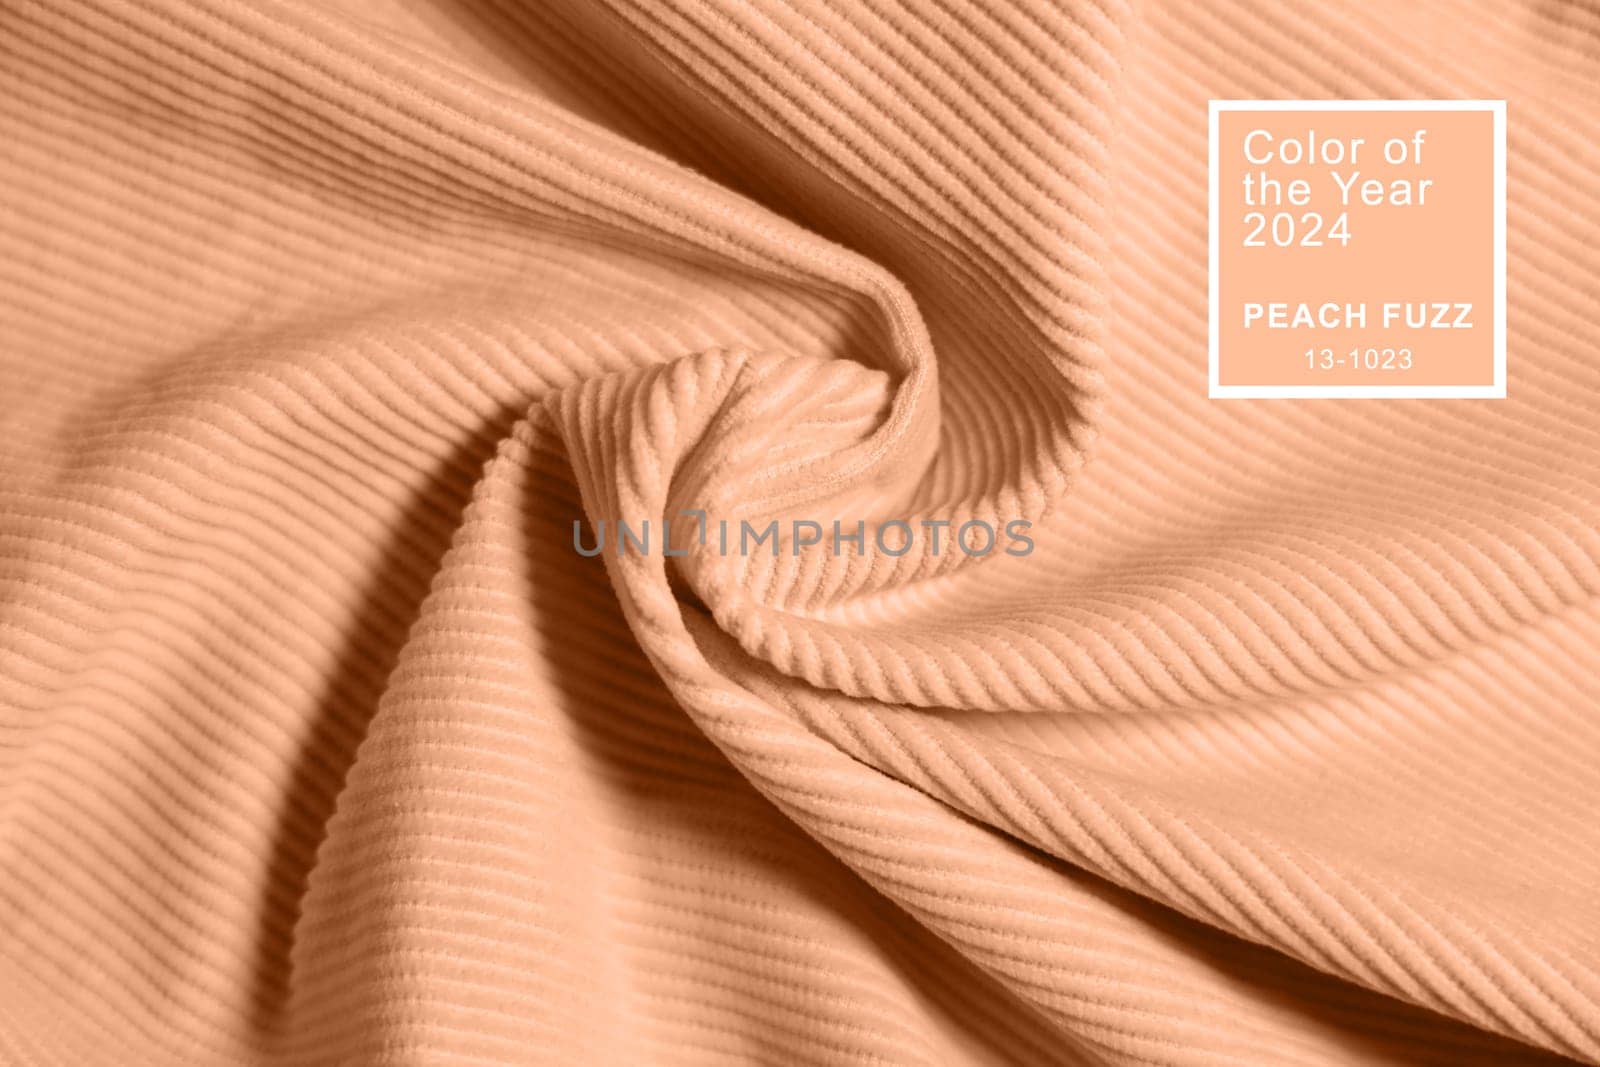 Peach fuzz, color of the year 2024, velvety fabric texture. Texture of velvet textile toned on peach fuzz color. by Ri6ka